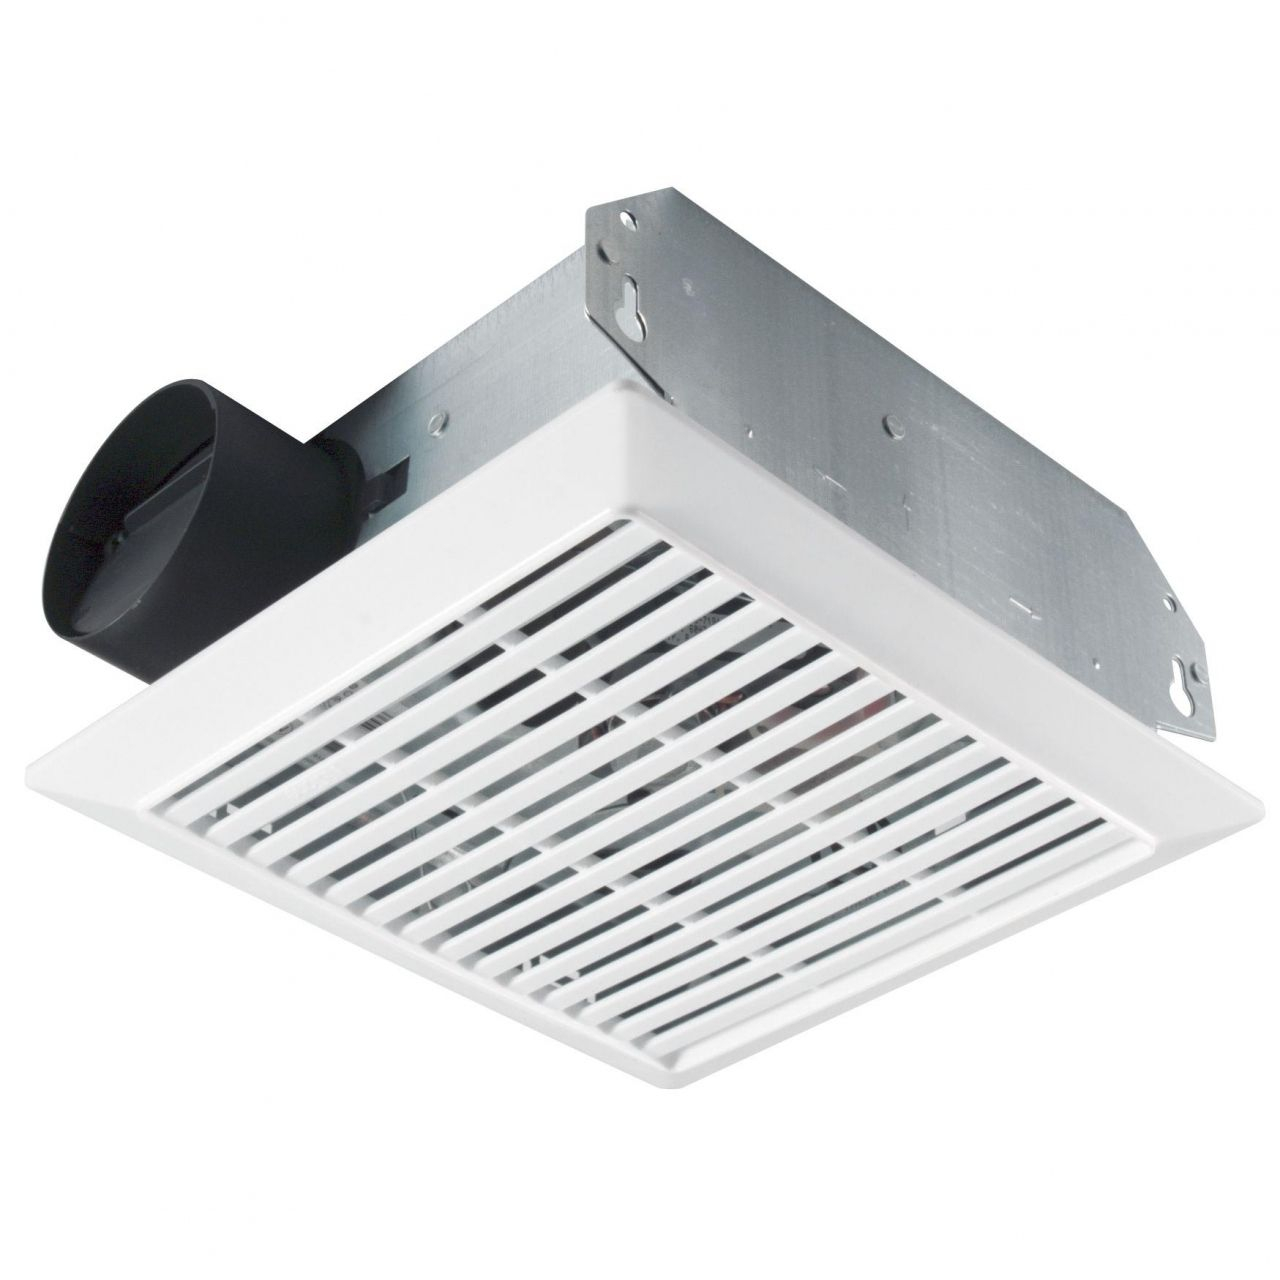 50 Large Bathroom Exhaust Fan Check More At Httpswww with measurements 1280 X 1280